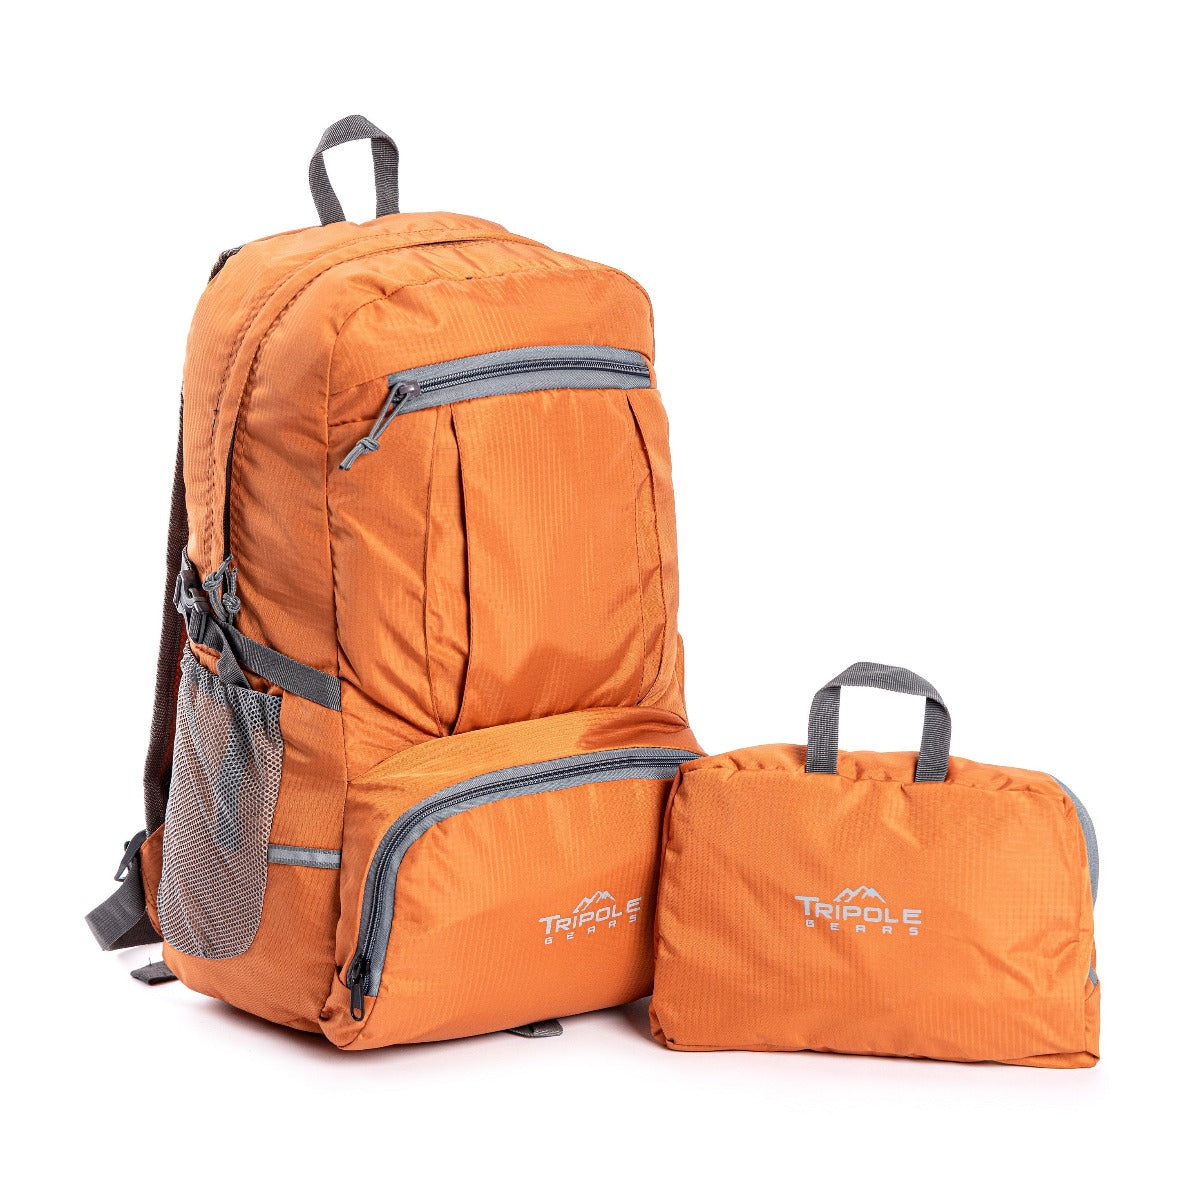 Foldable PAKEASY Backpack and Day Bag for Hiking and Day Trips - Orange 2